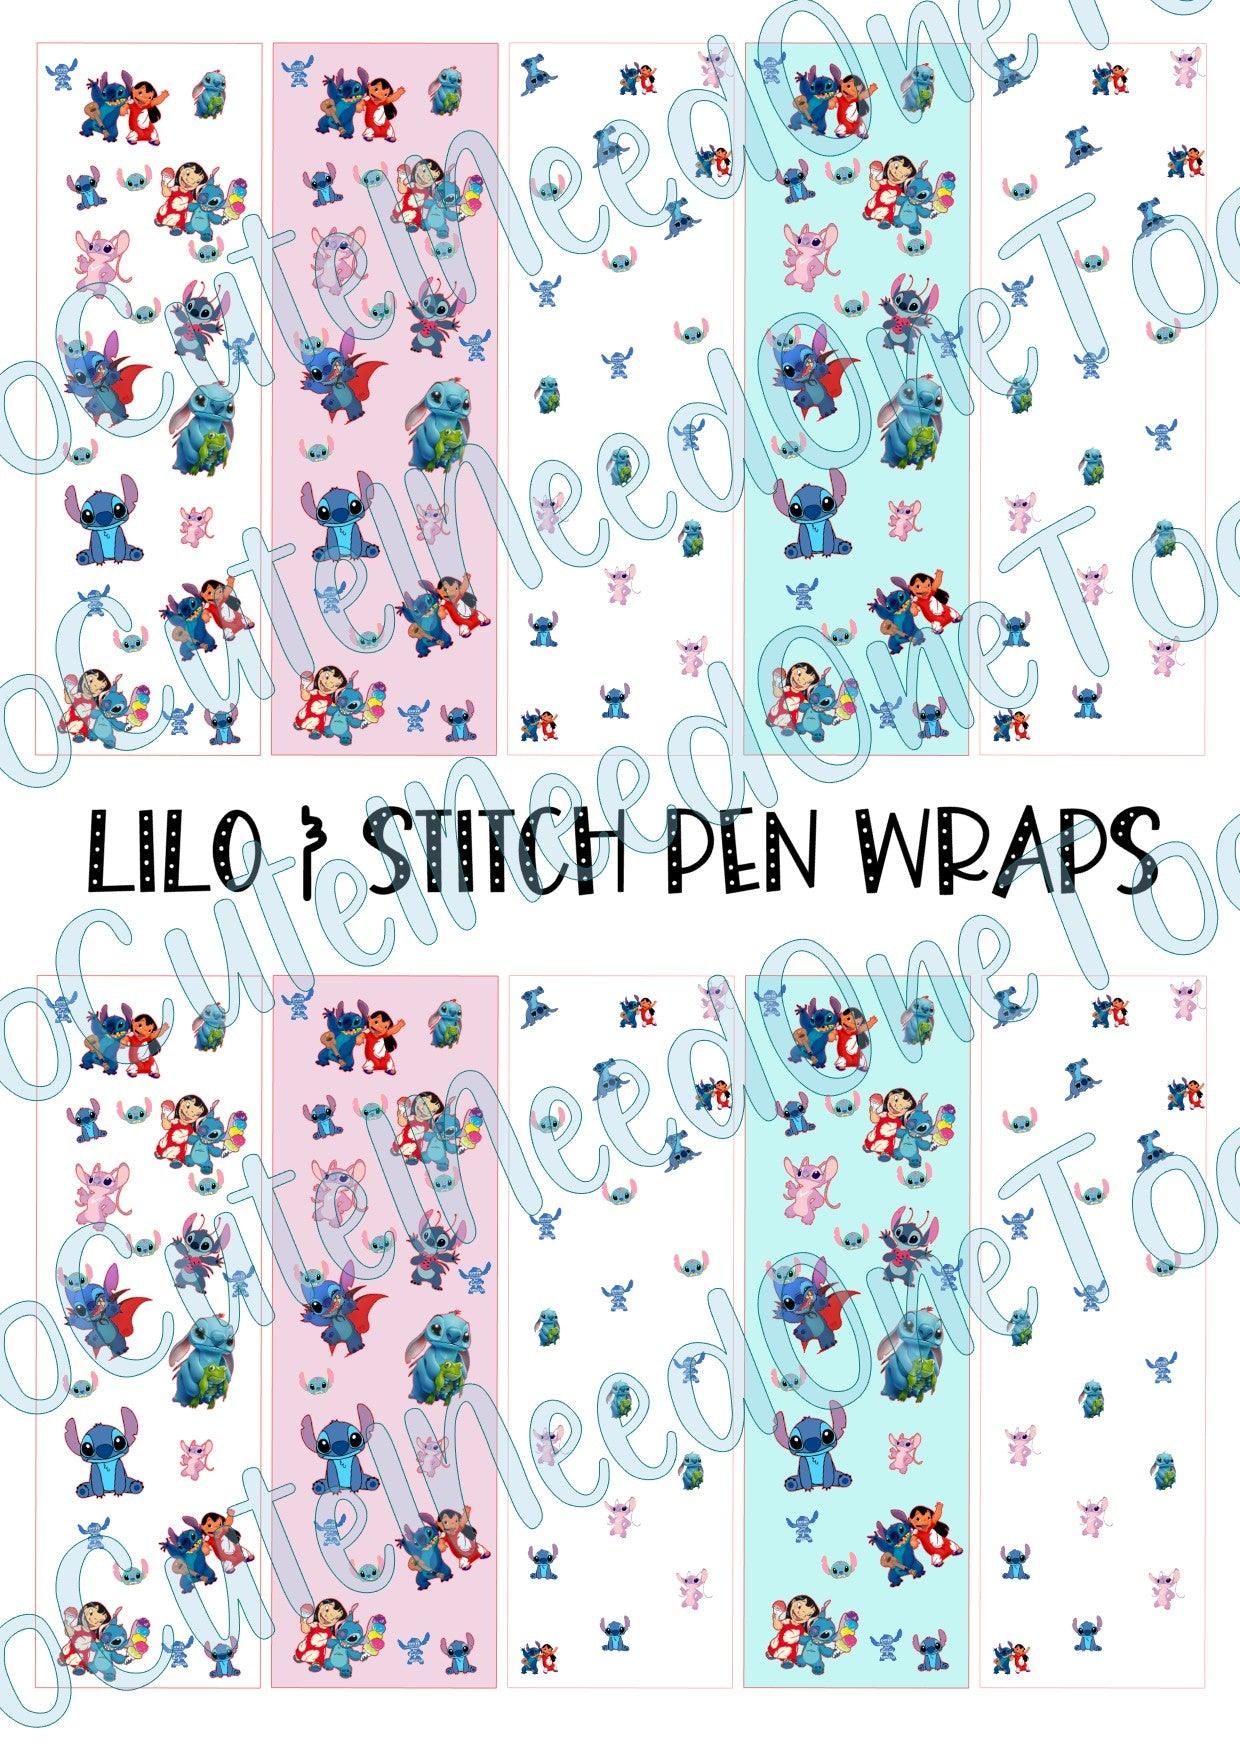 Lilo & Stitch Pen Wraps- Clear/White Waterslide Paper Ready To Use - SoCuteINeedOneToo